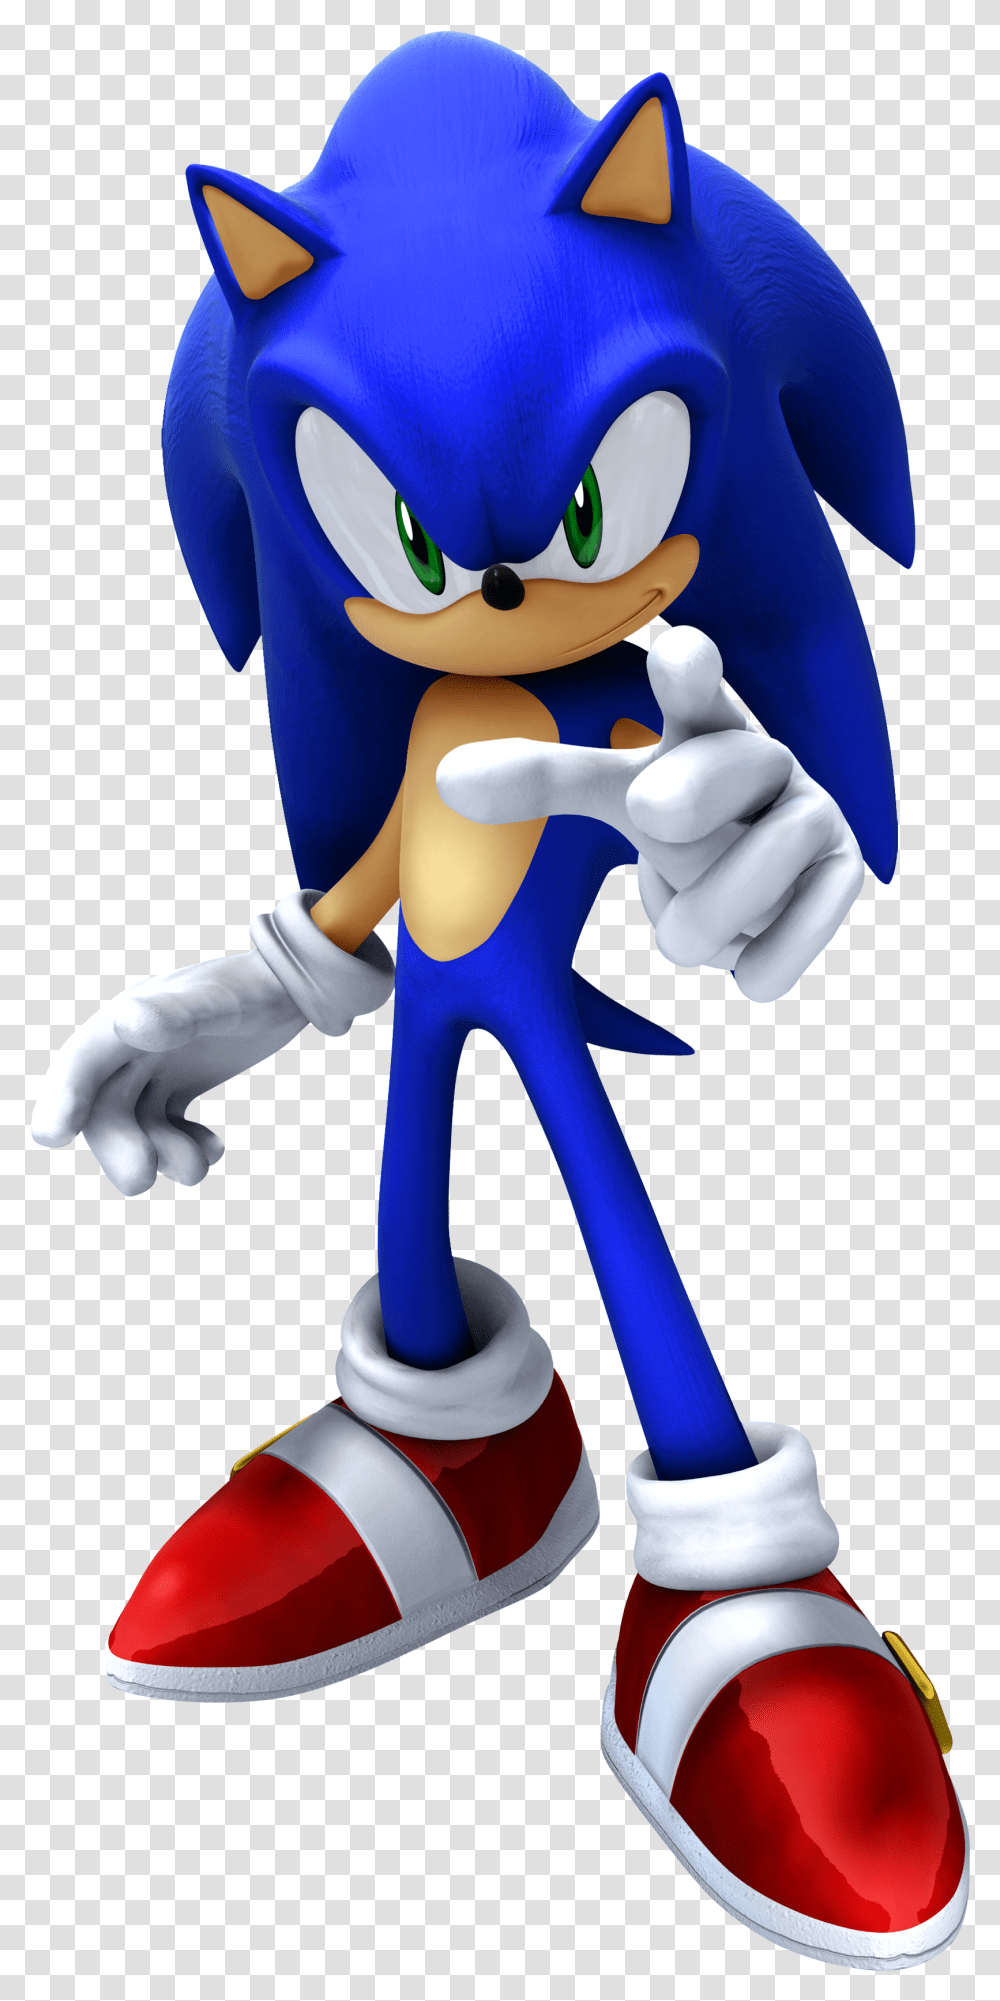 Sonic The Hedgehog 2006 Sonic, Toy, Super Mario, Mascot, Figurine Transparent Png